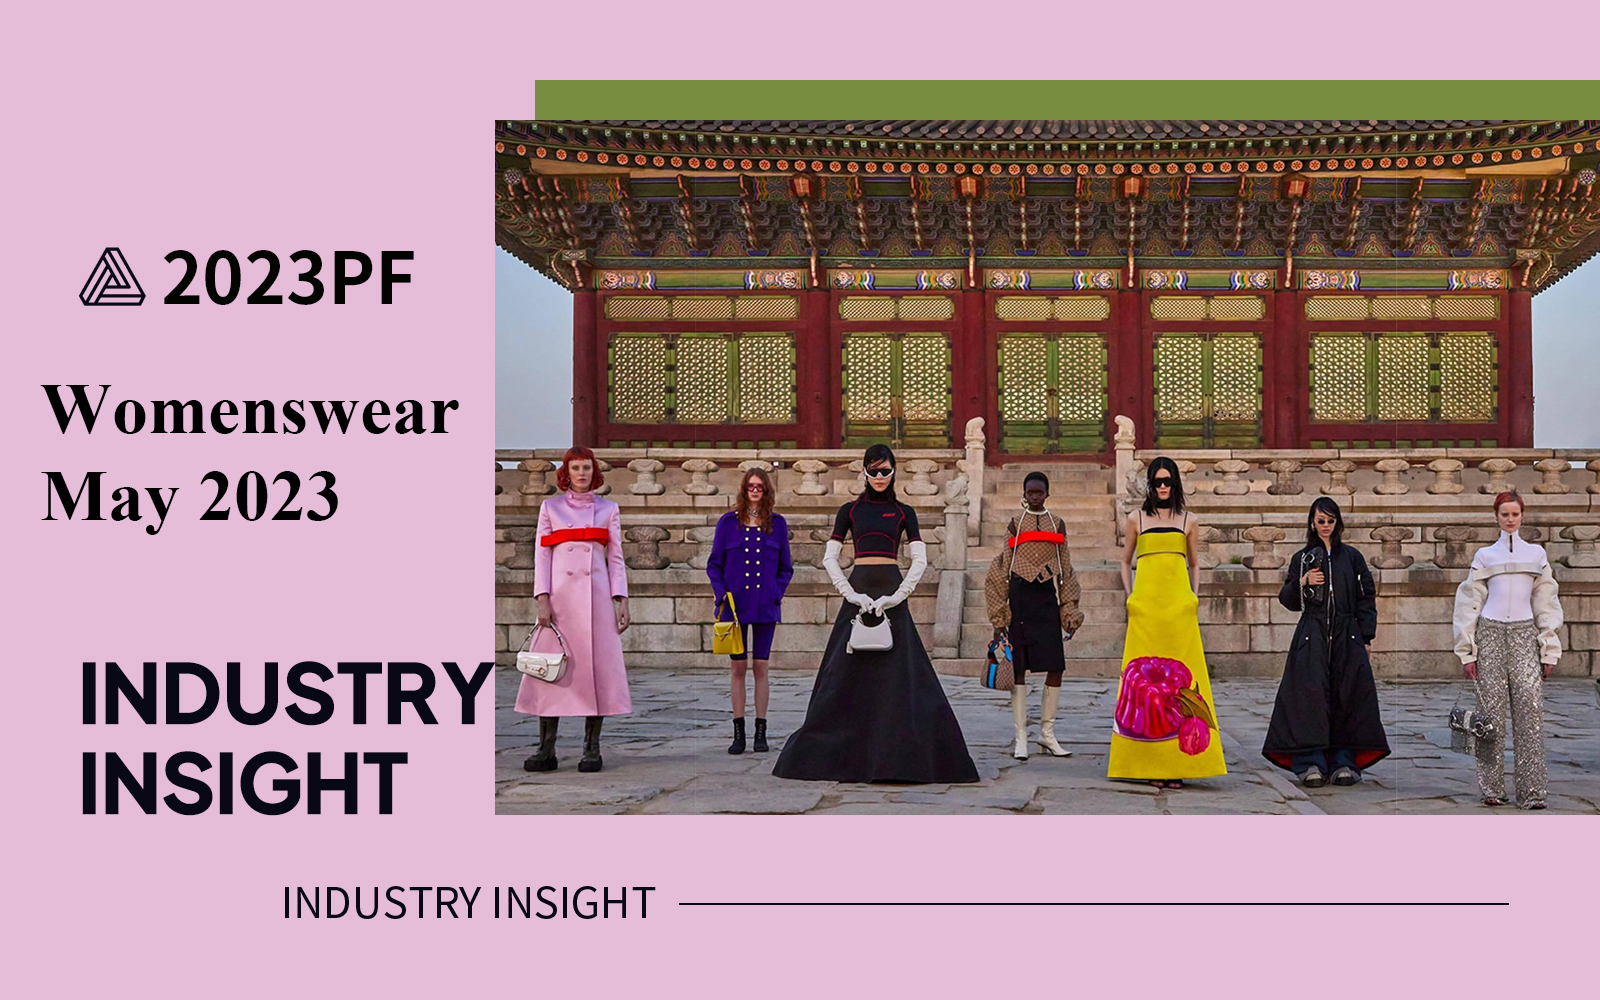 May 2023 -- The Industry Insight of Womenswear